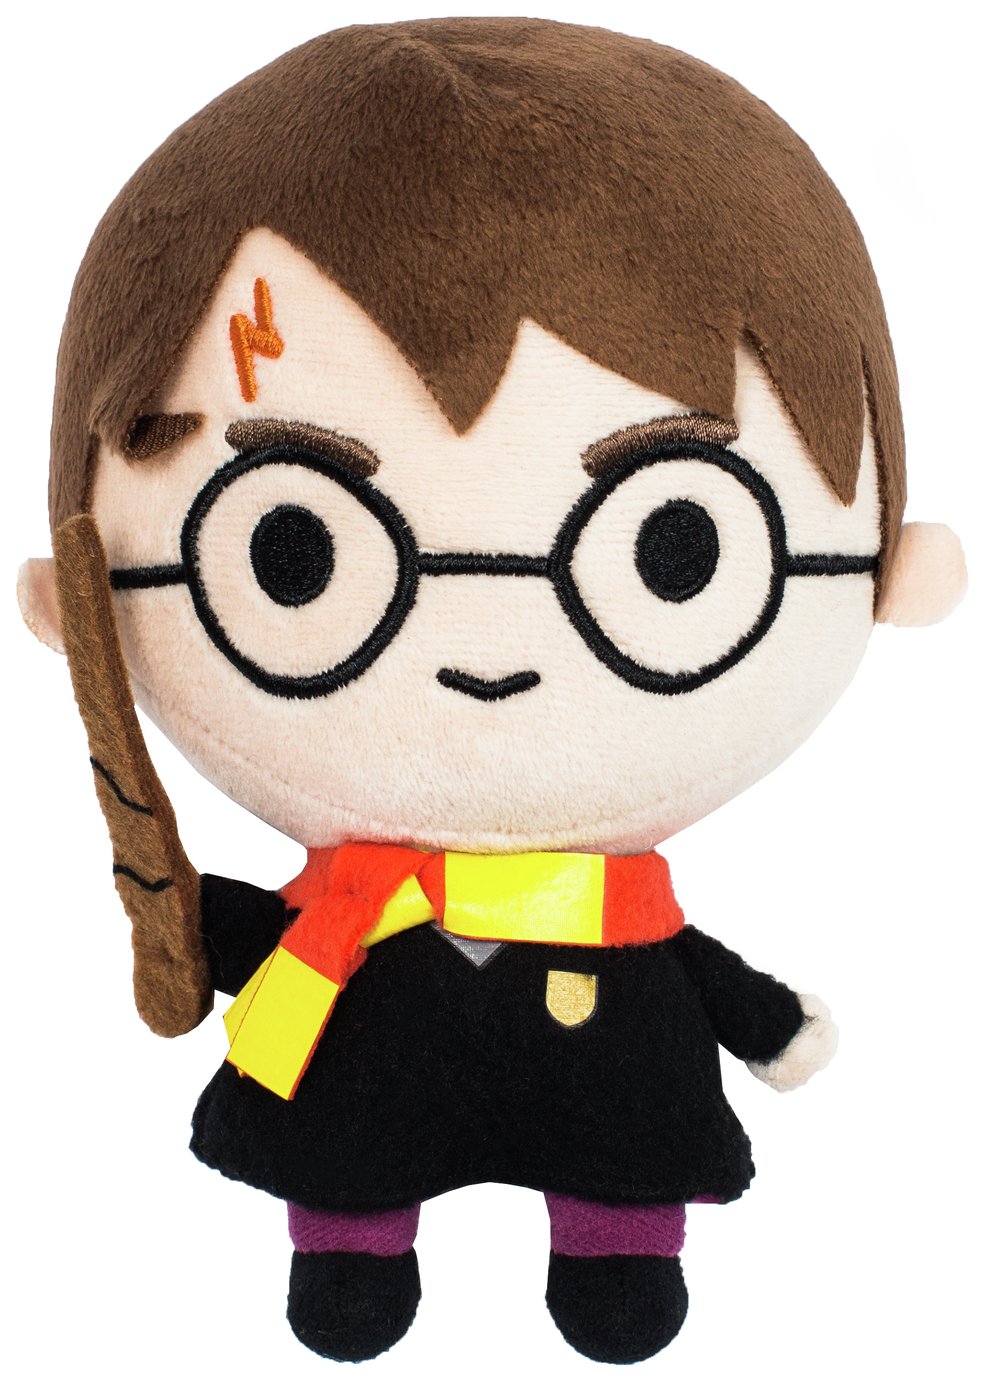 Harry Potter 6 inch Soft Toy Assortment review